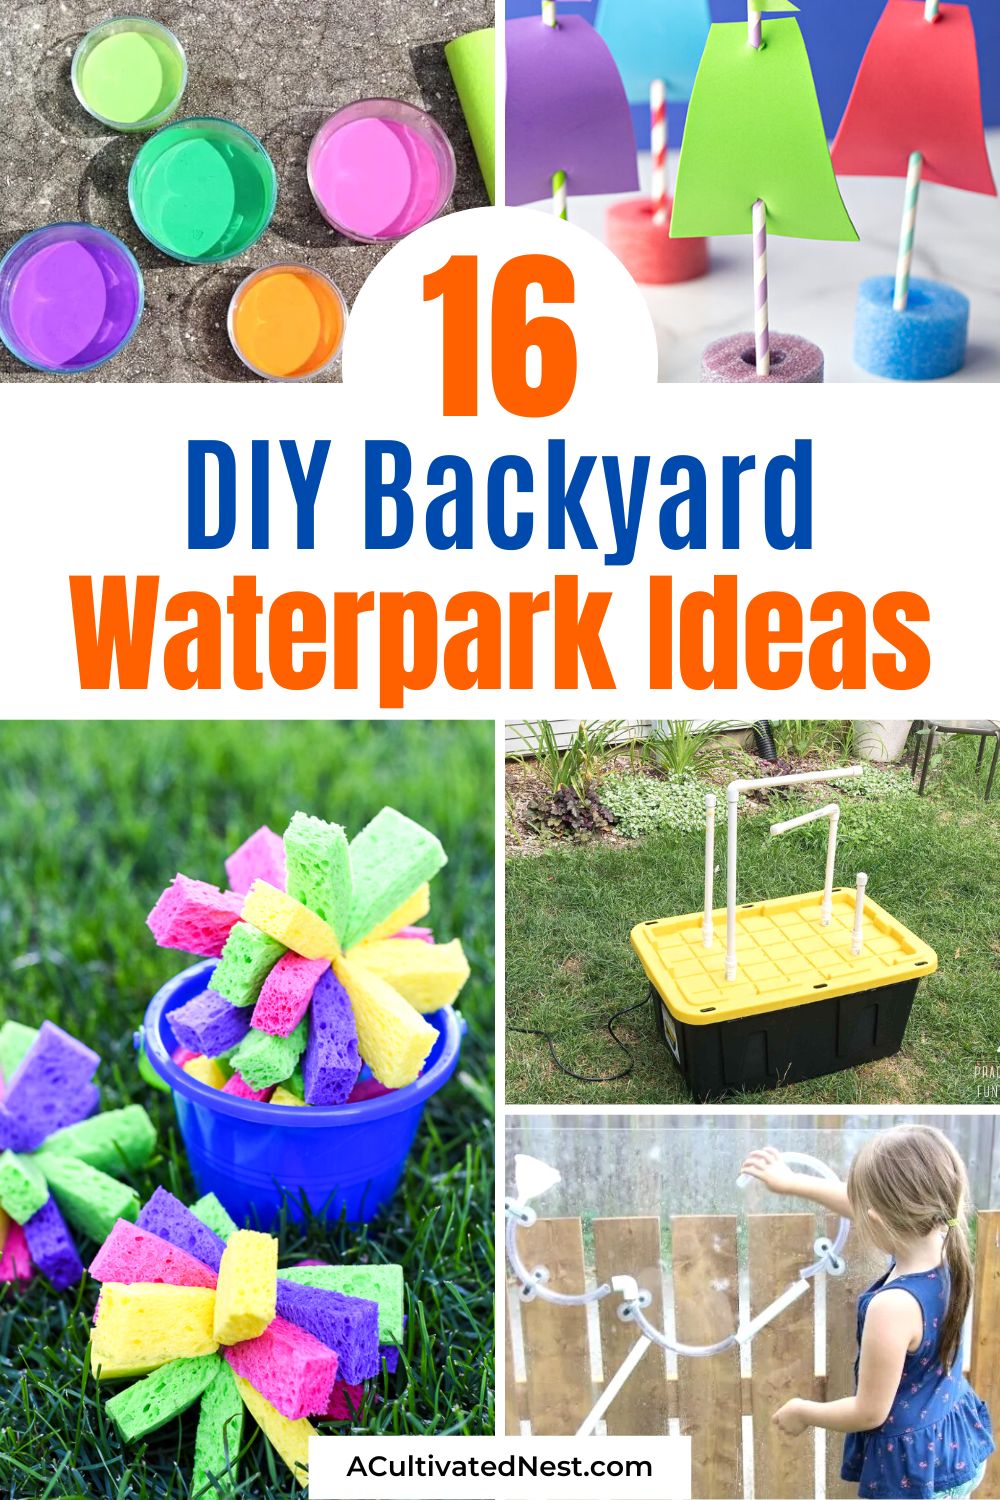 How to Make a DIY Water Park in Your Backyard- Who needs to visit a water park when you can have your own right in your backyard? Explore 16 DIY water park activity ideas to turn your outdoor space into a thrilling water wonderland! | #BackyardWaterPark #DIYSummerFun #OutdoorPlaytime #ActivitiesForKids #ACultivatedNest